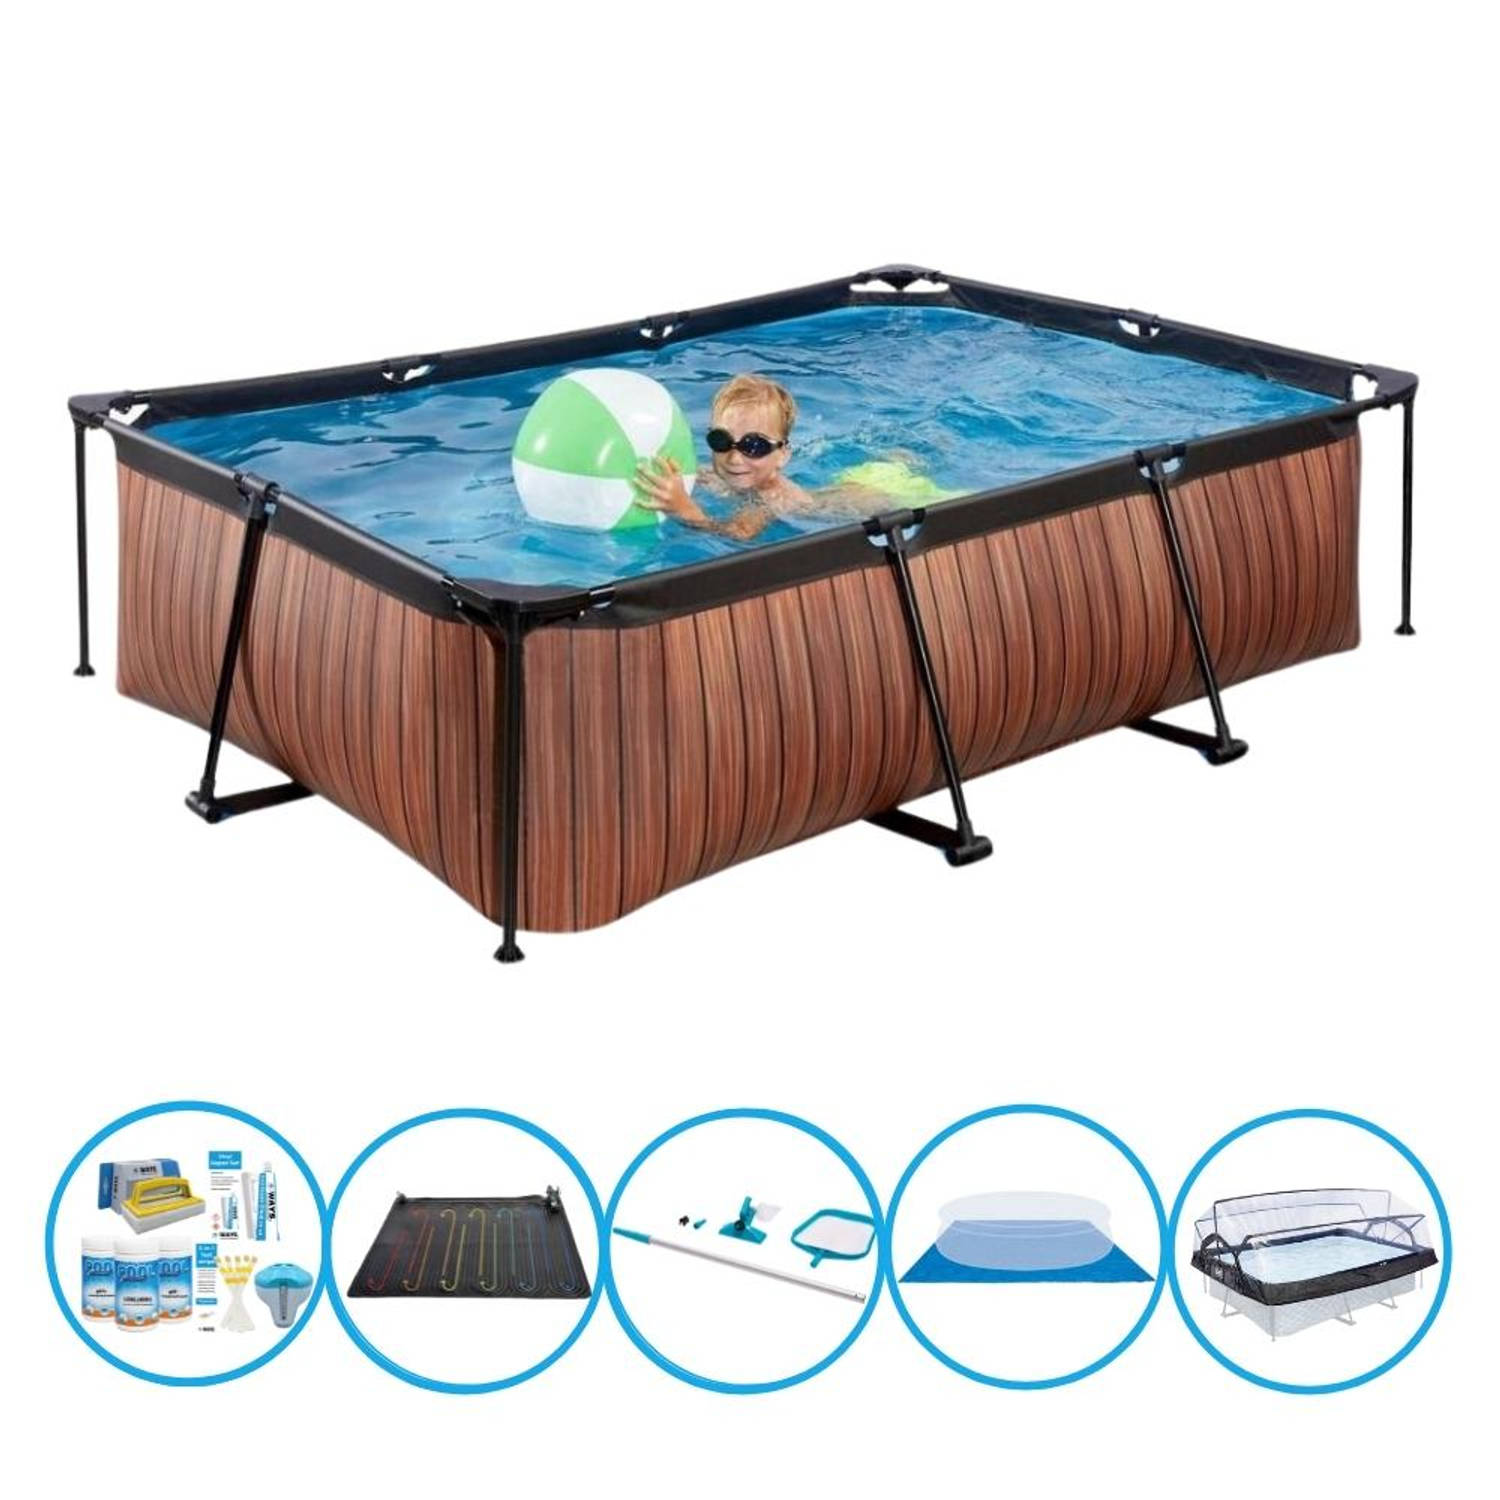 EXIT Toys Exit Zwembad Timber Style - 220x150x60 Cm - Frame Pool - Inclusief Accessoires - Bruin